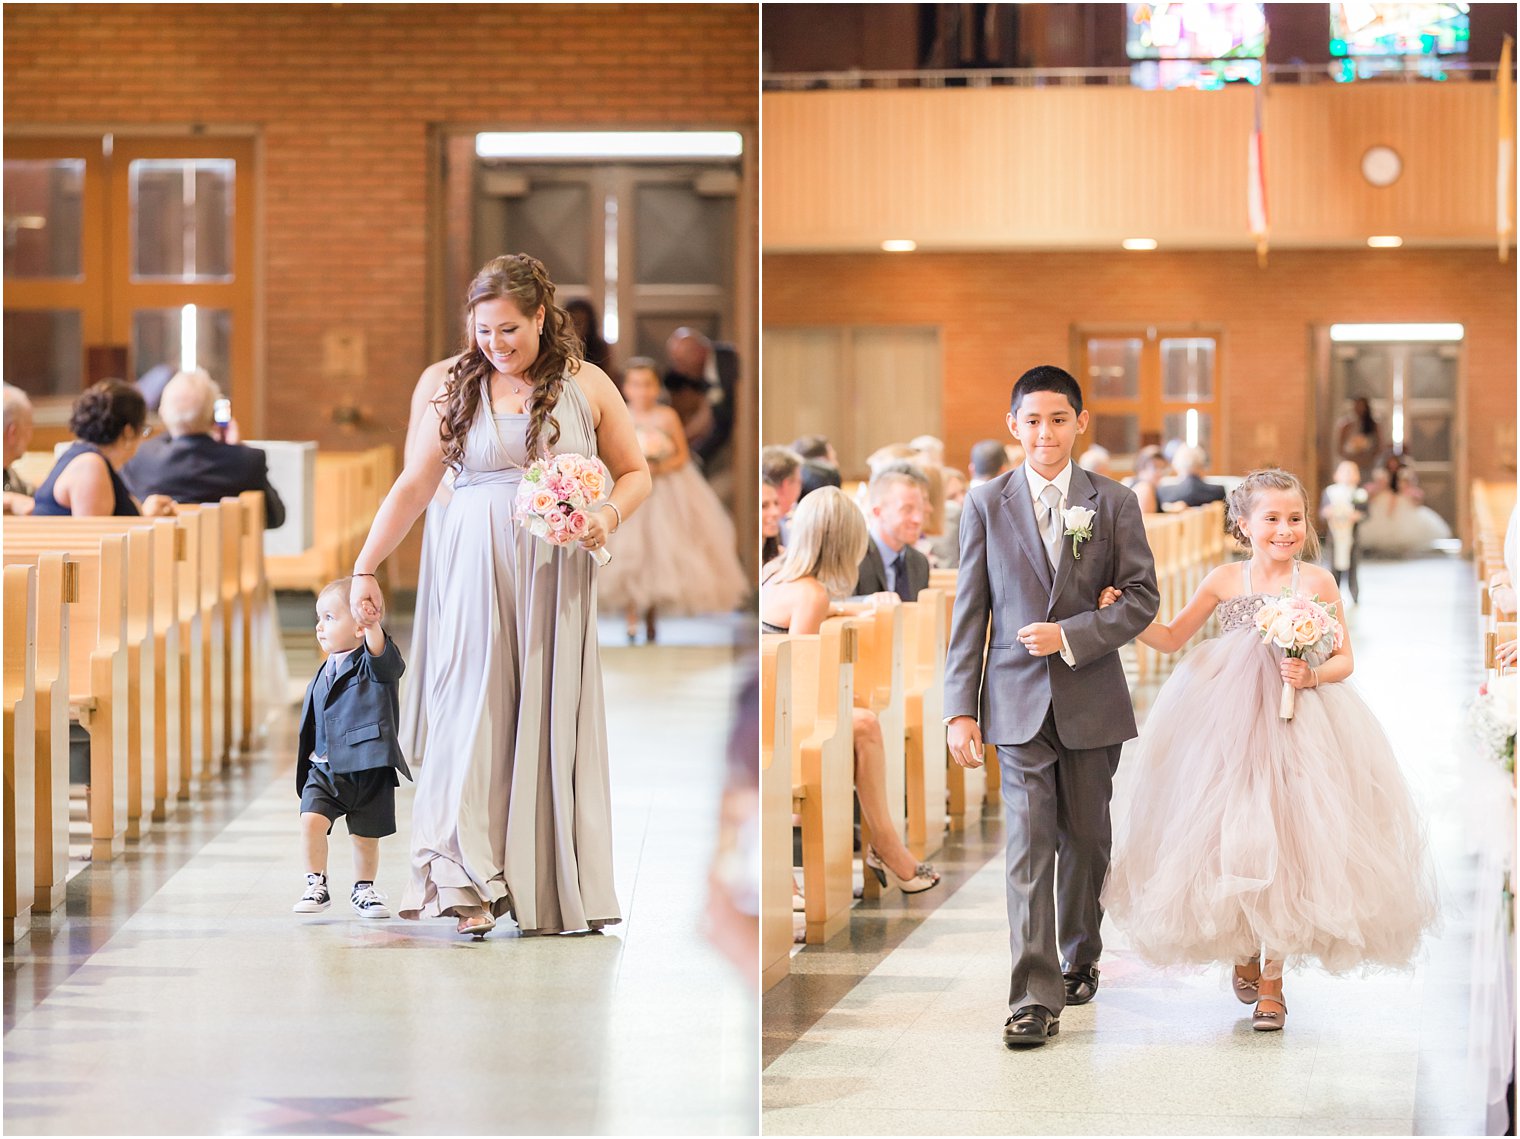 Flower girls and ring bearers in gray and pink